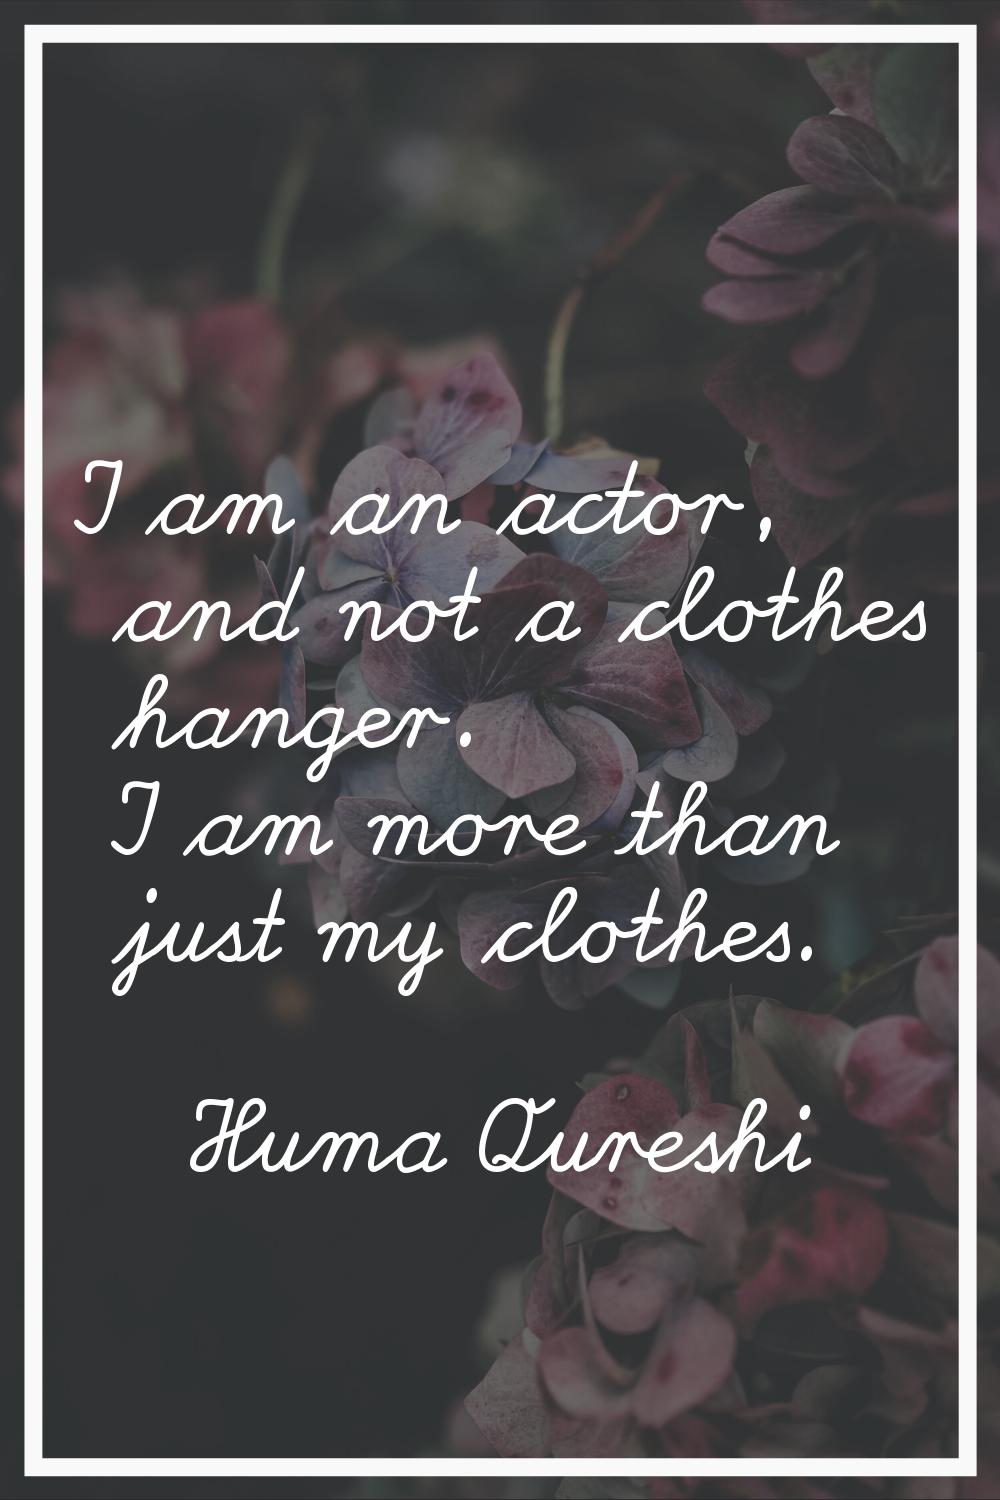 I am an actor, and not a clothes hanger. I am more than just my clothes.